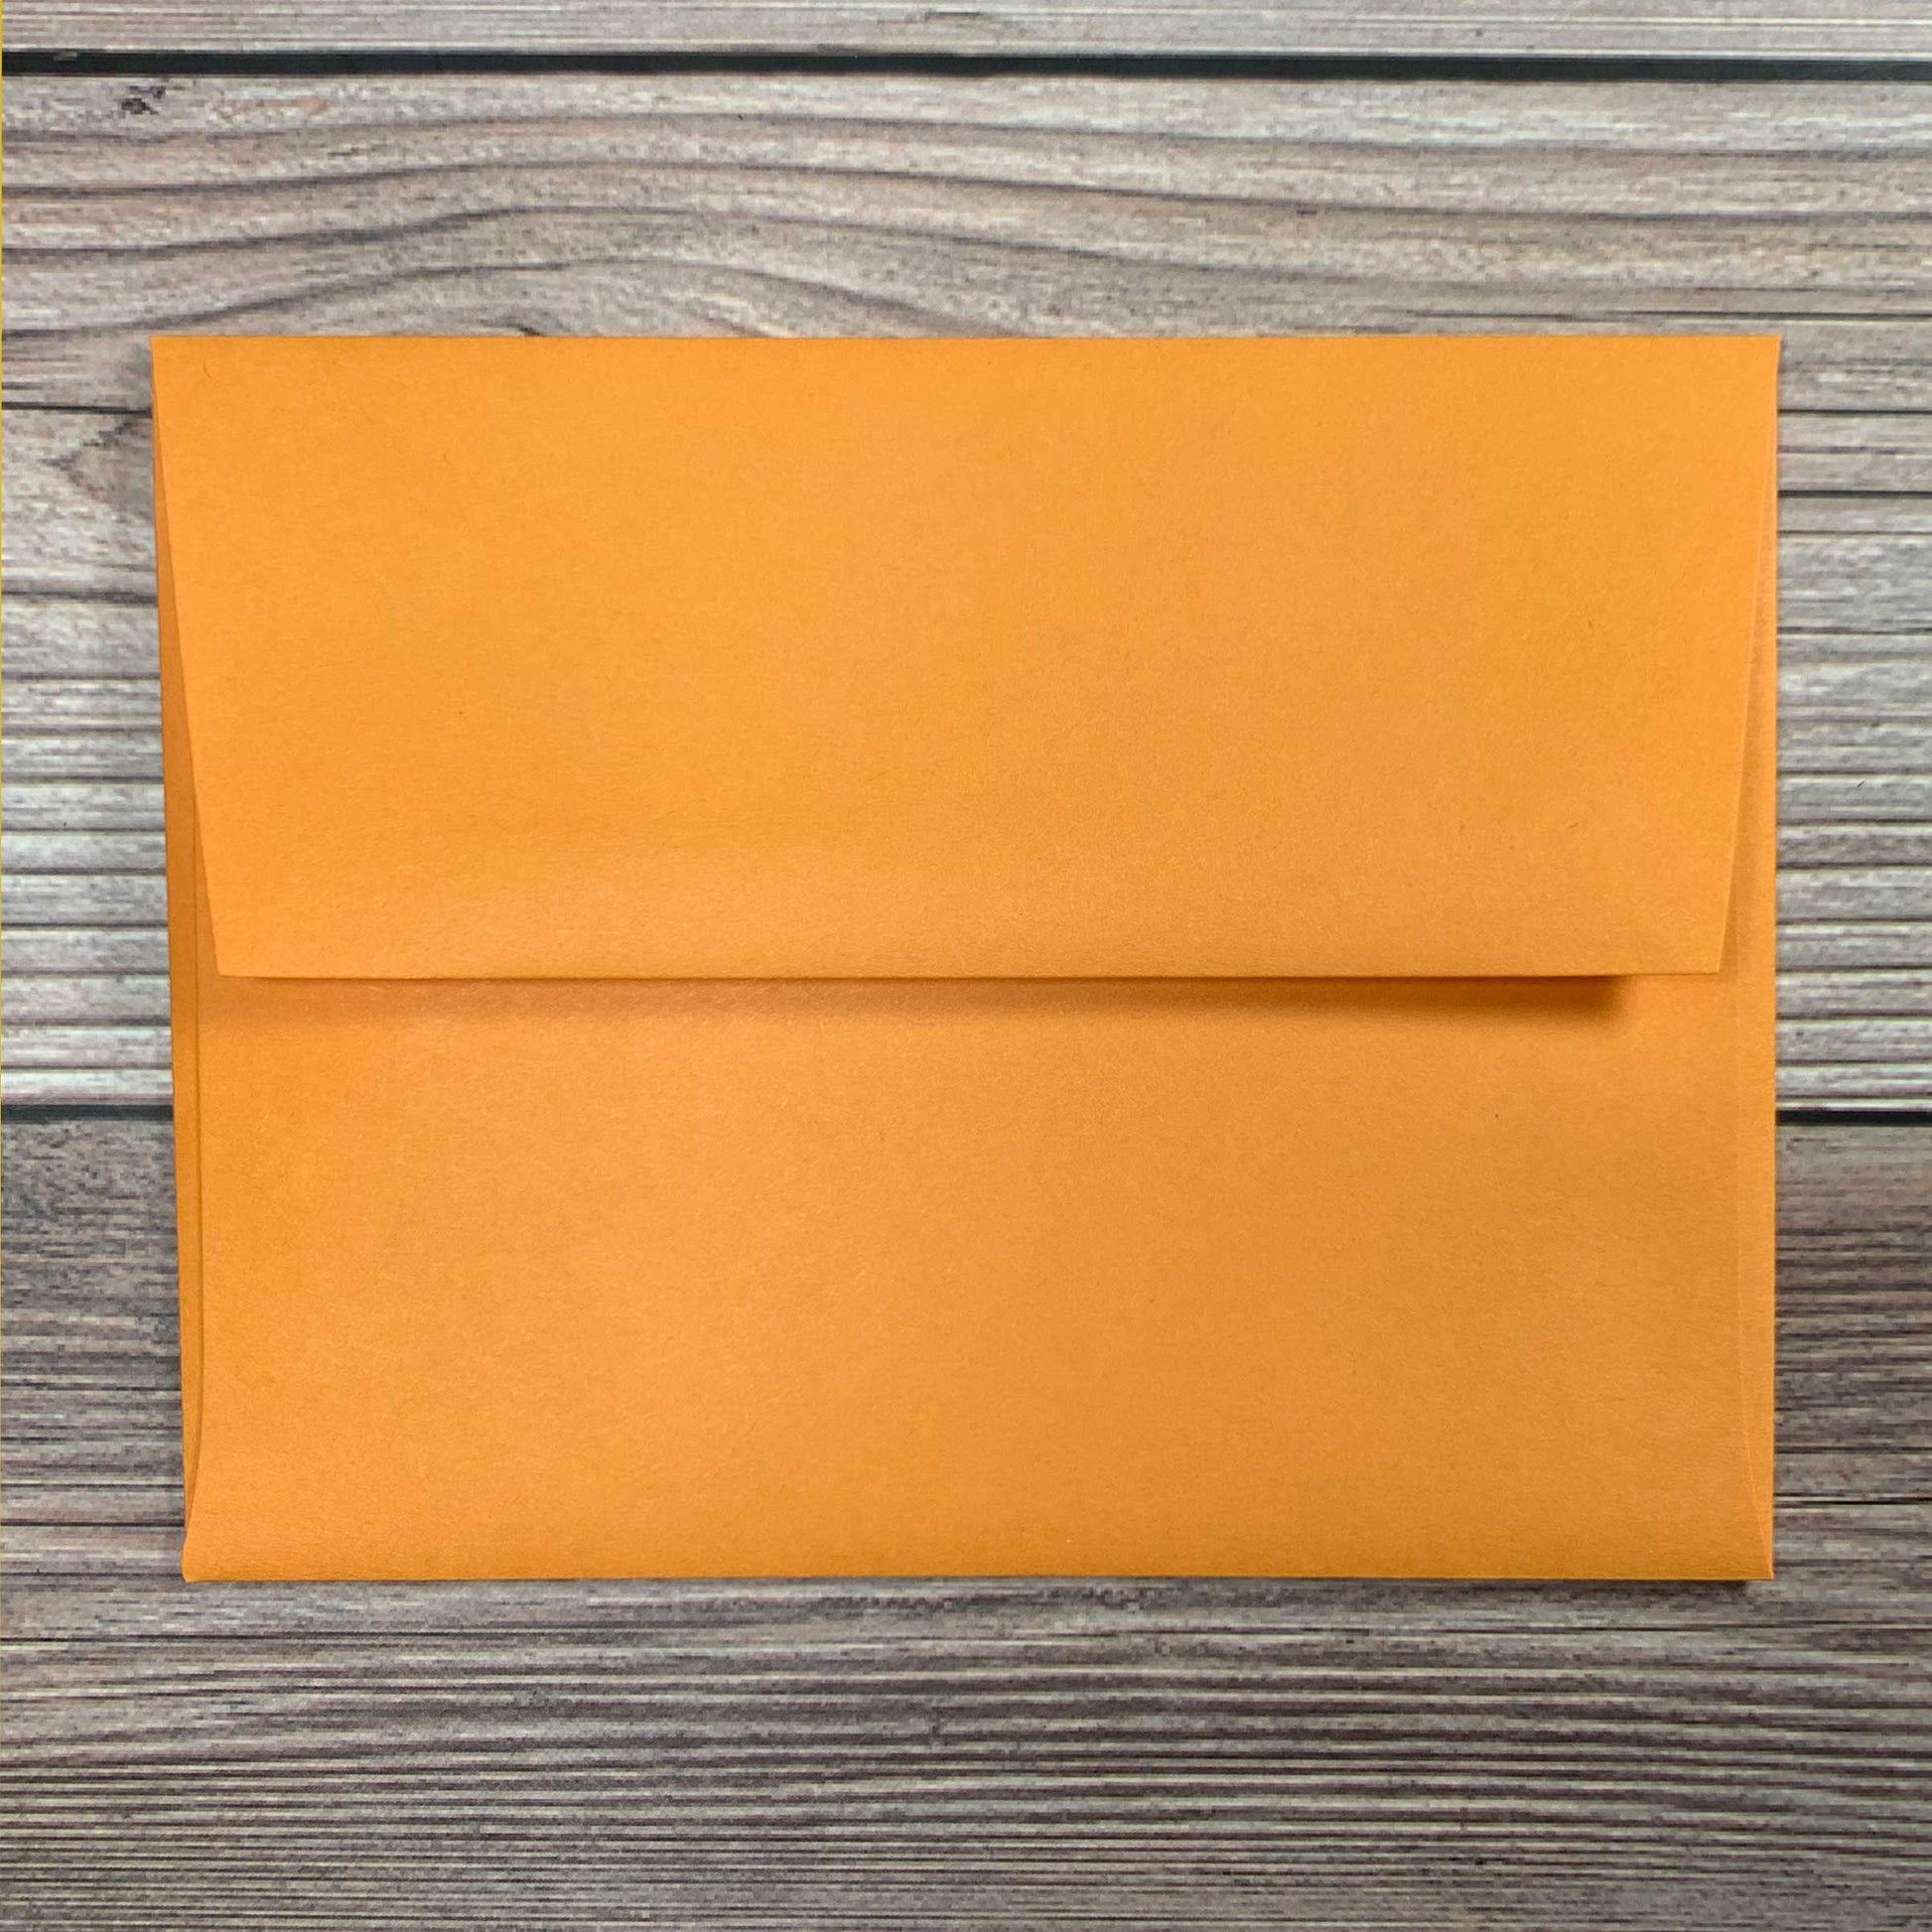 Greeting Card envelope, orange color, square flap, included with letterpress plantable seed card.